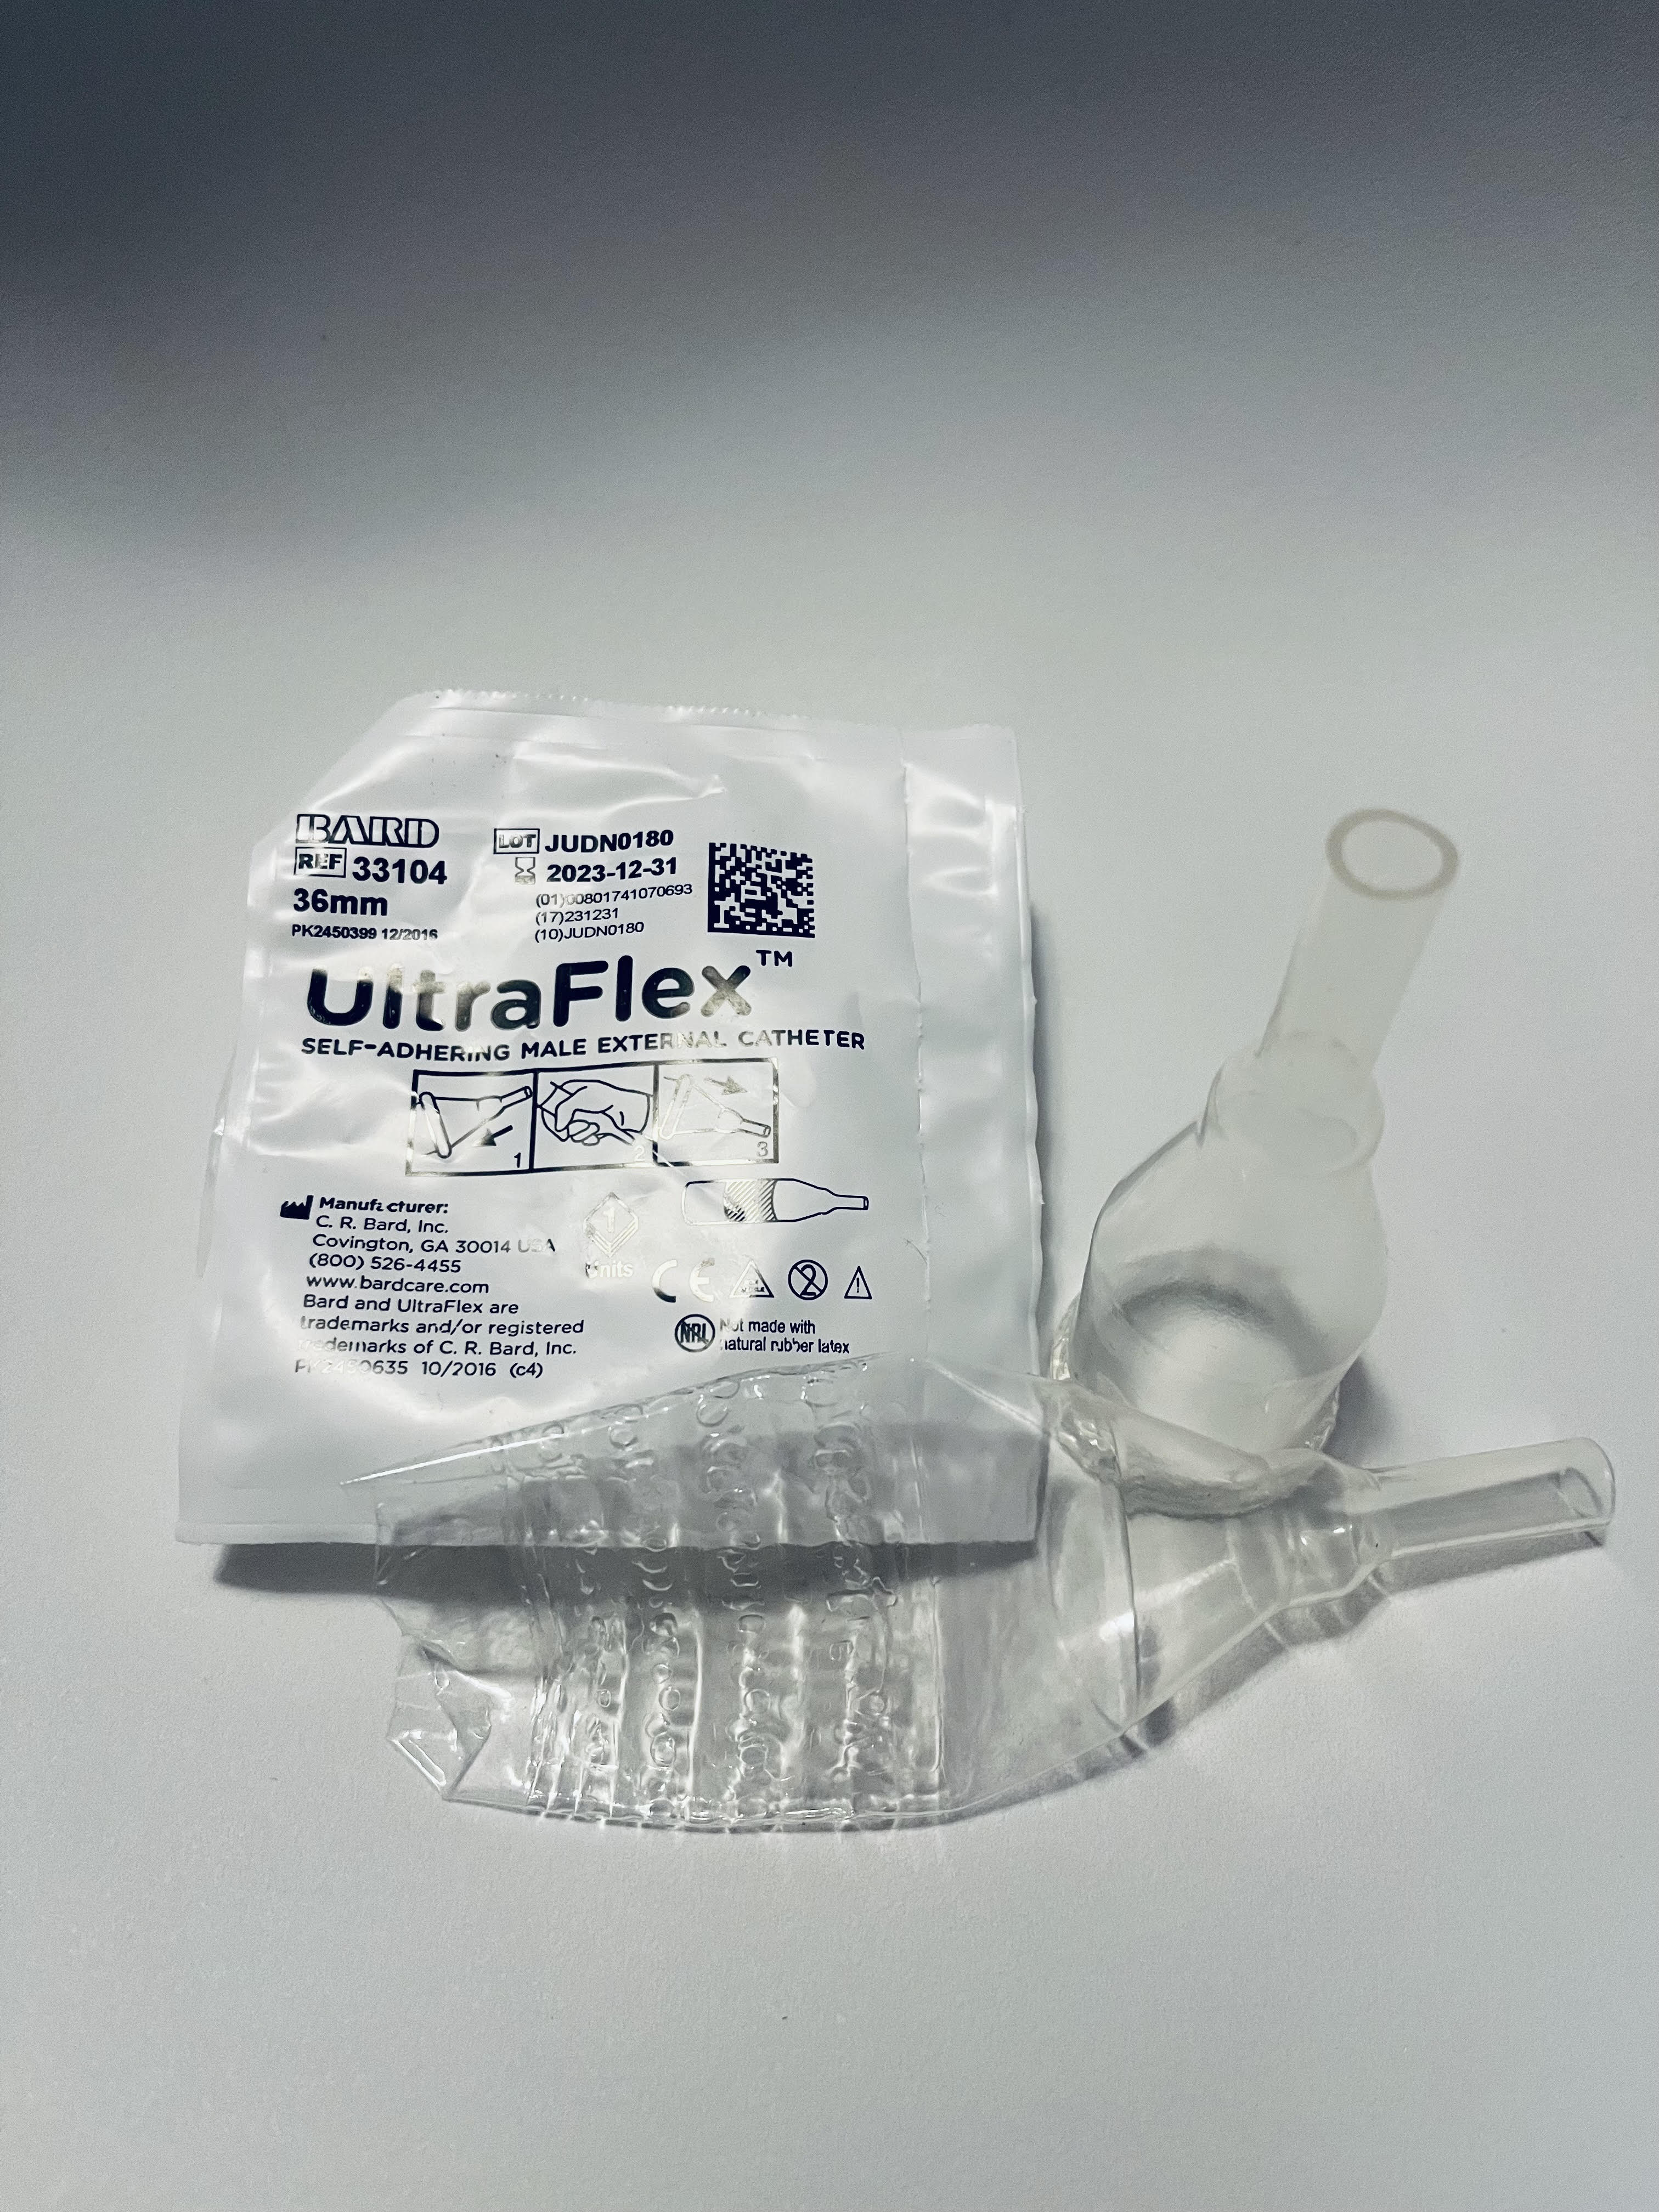 Urinary Kits 1-Week Kits 1-Week Urinary Incontinence  Kit (36mm UltraFlex) by Veteran Medical Supplies online store selling catheters, drainage bags, urinary kits centrally located in Kansas City Missouri shipping to the entire United States